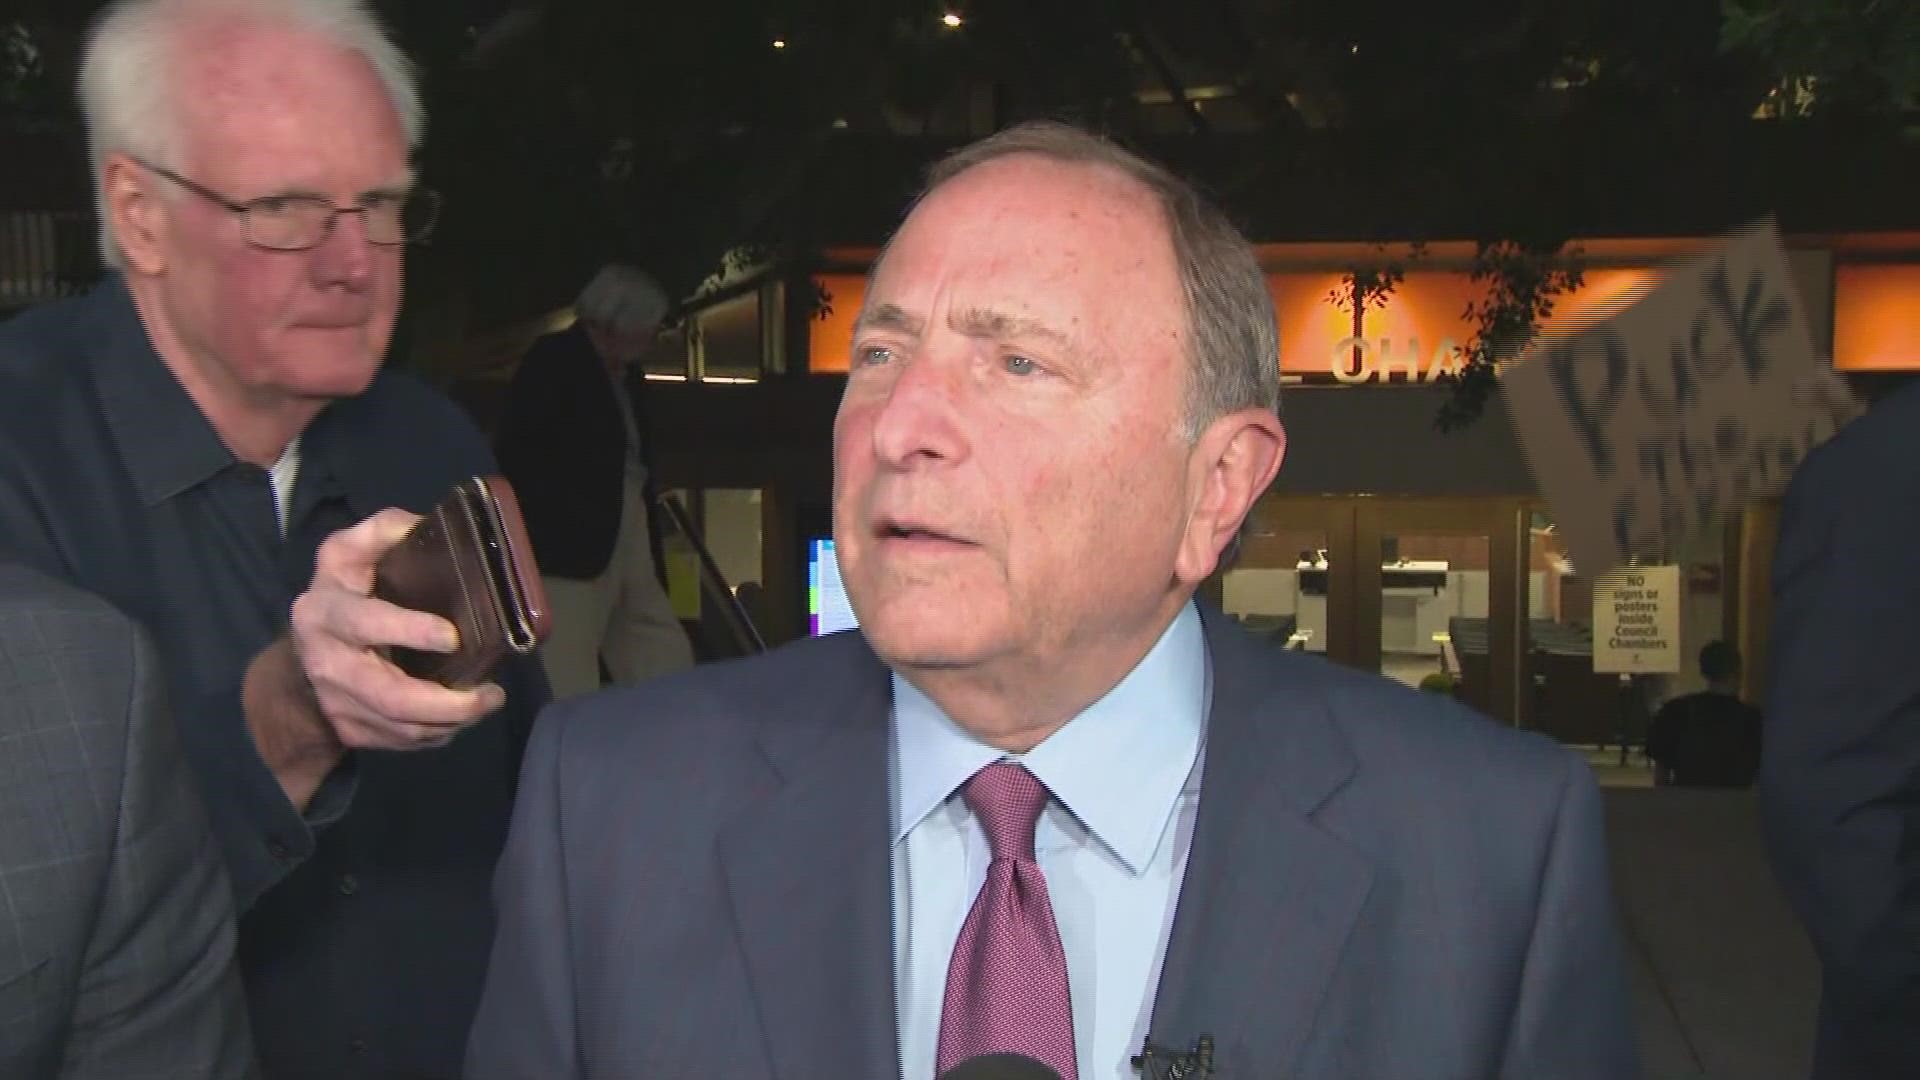 NHL Commissioner Gary Bettman was in Arizona Tuesday to show his support for the proposed Coyotes arena and entertainment district.